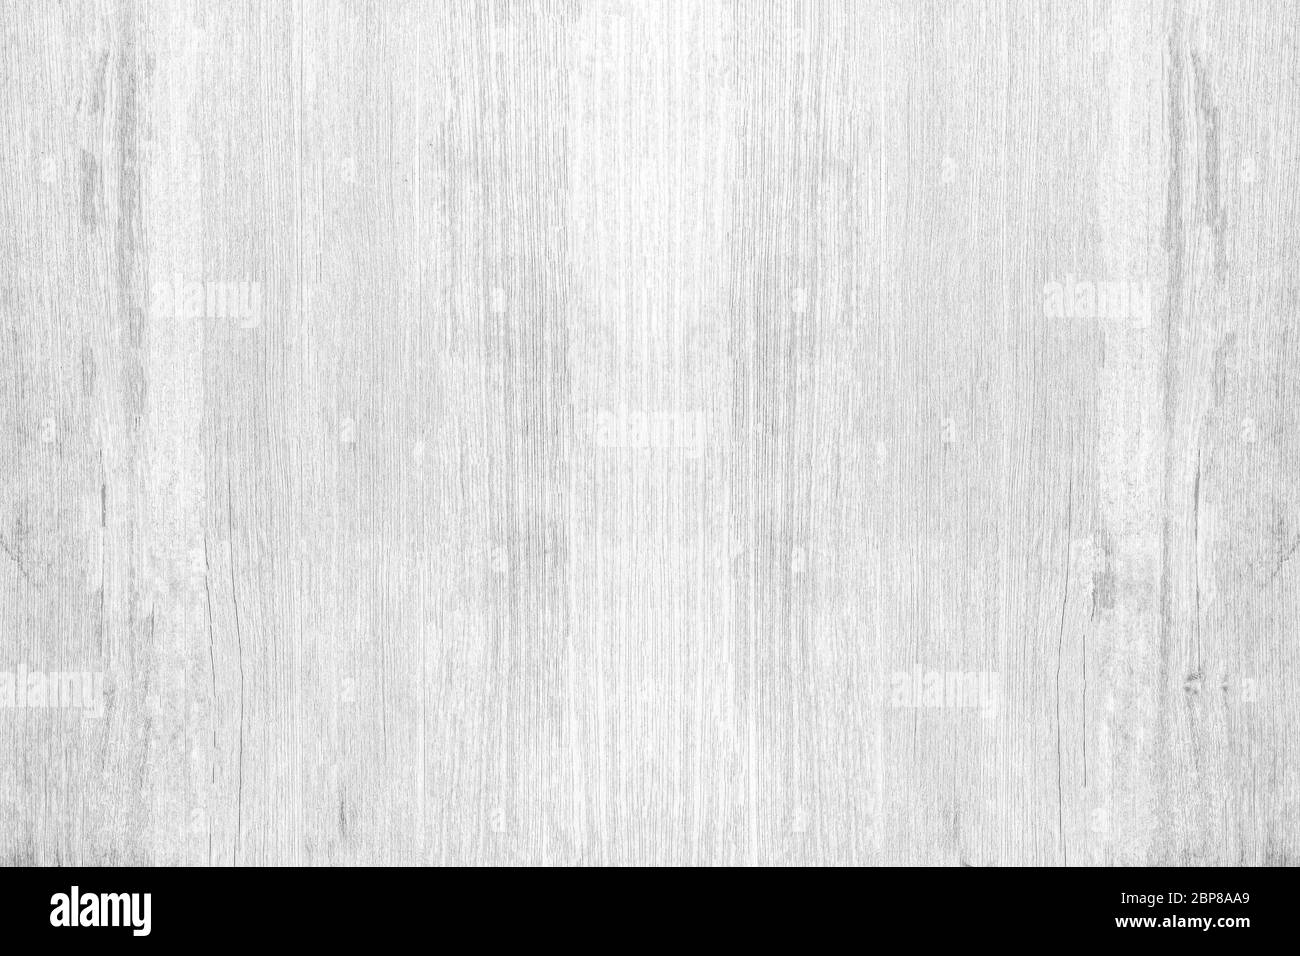 White texture of old wood. Empty plank wooden wall background with light pattern natural copy space. Stock Photo